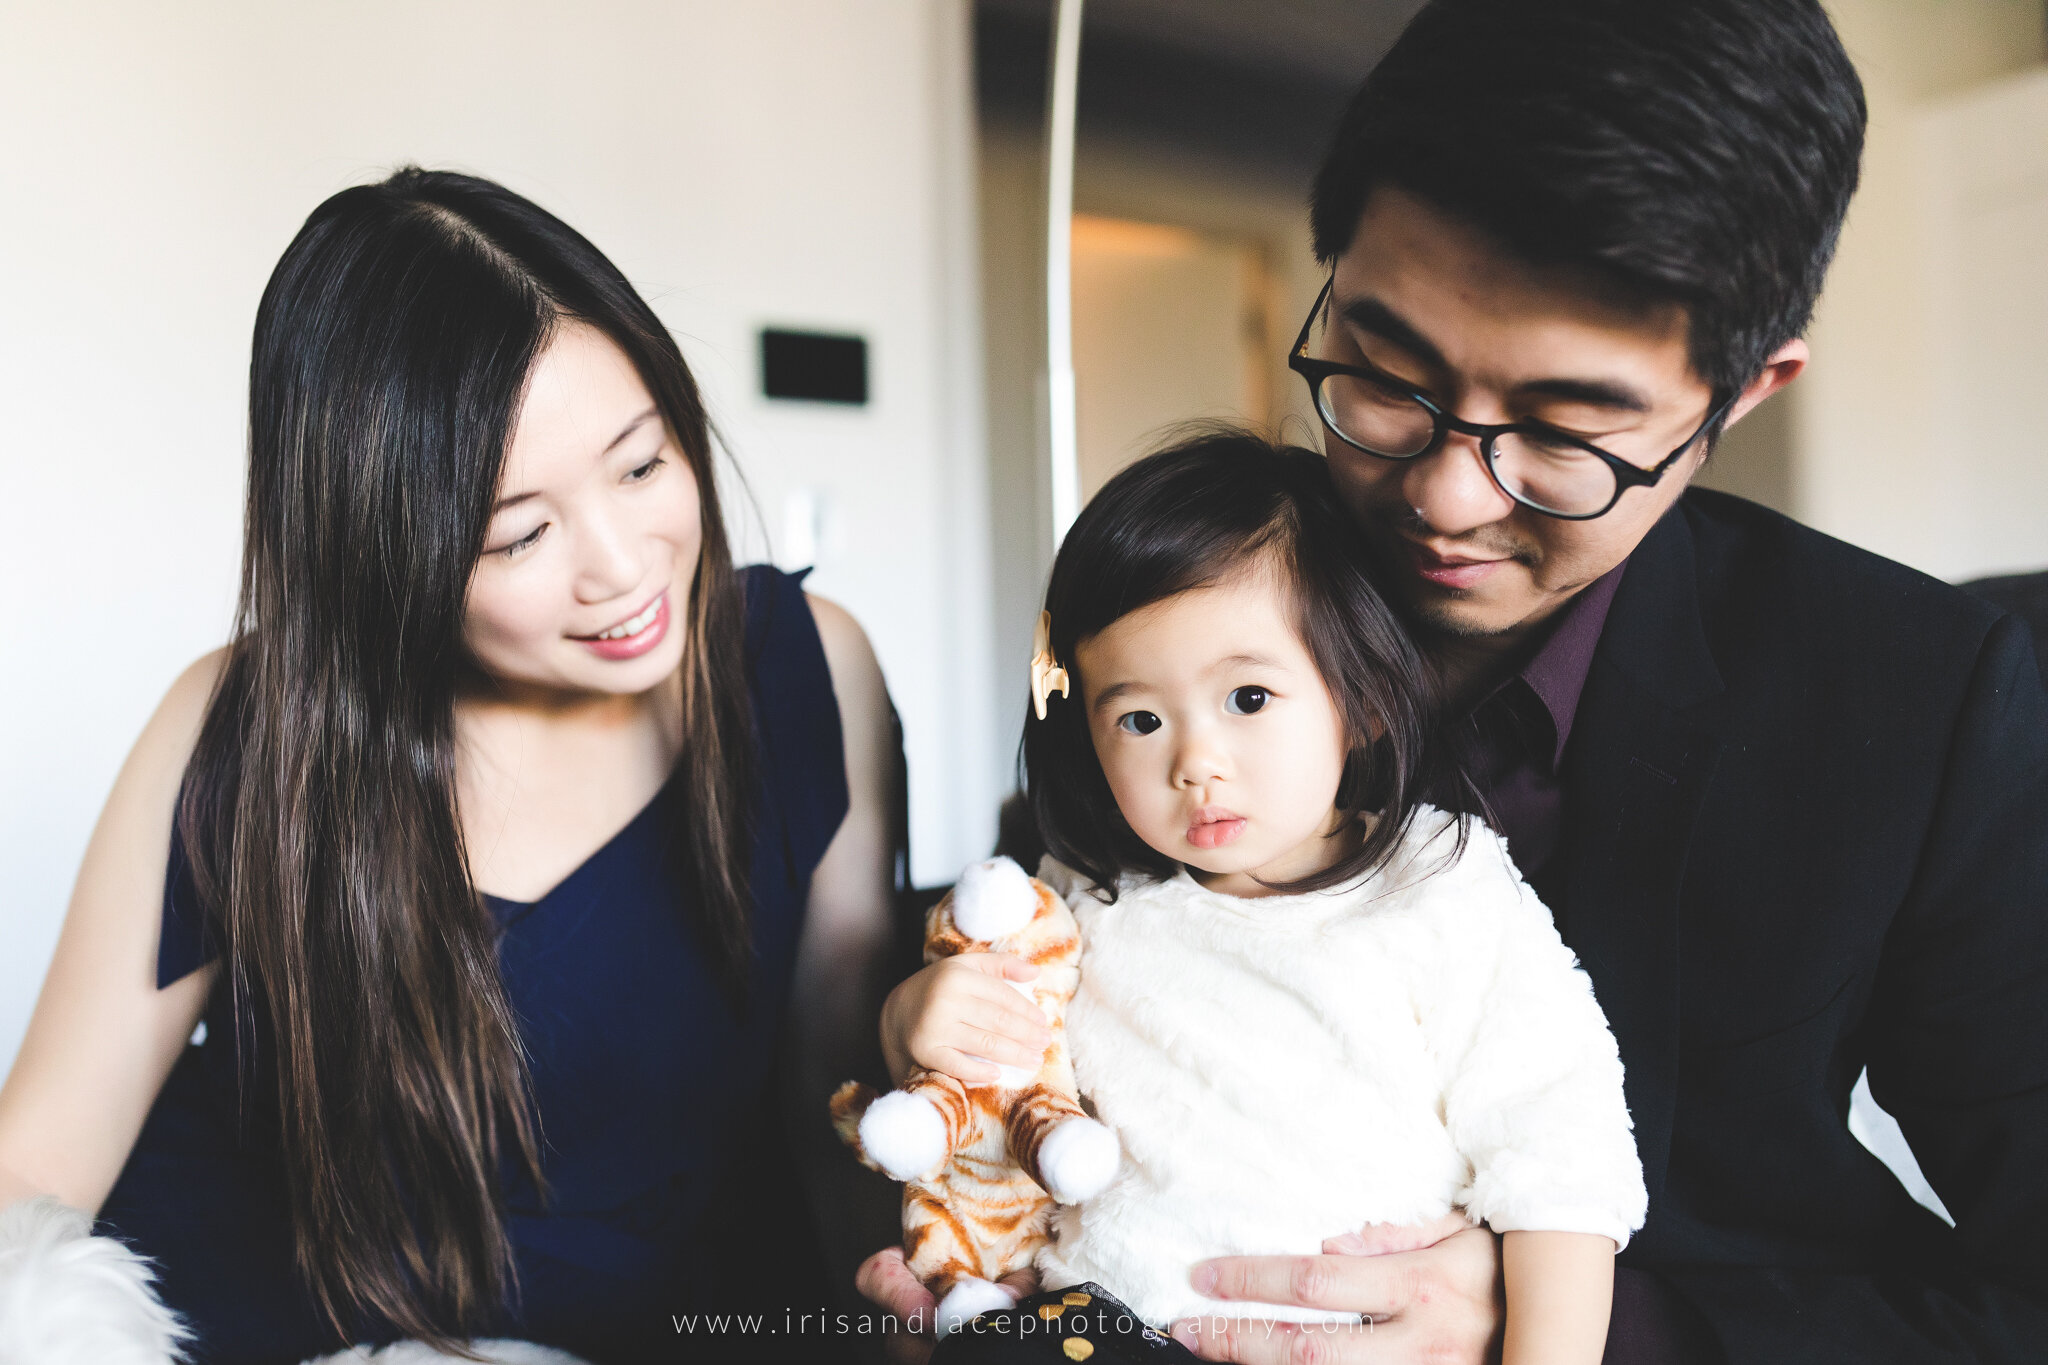 Menlo Park Family Lifestyle Photography  |  Iris and Lace Photography  |  Northern California Family Photography